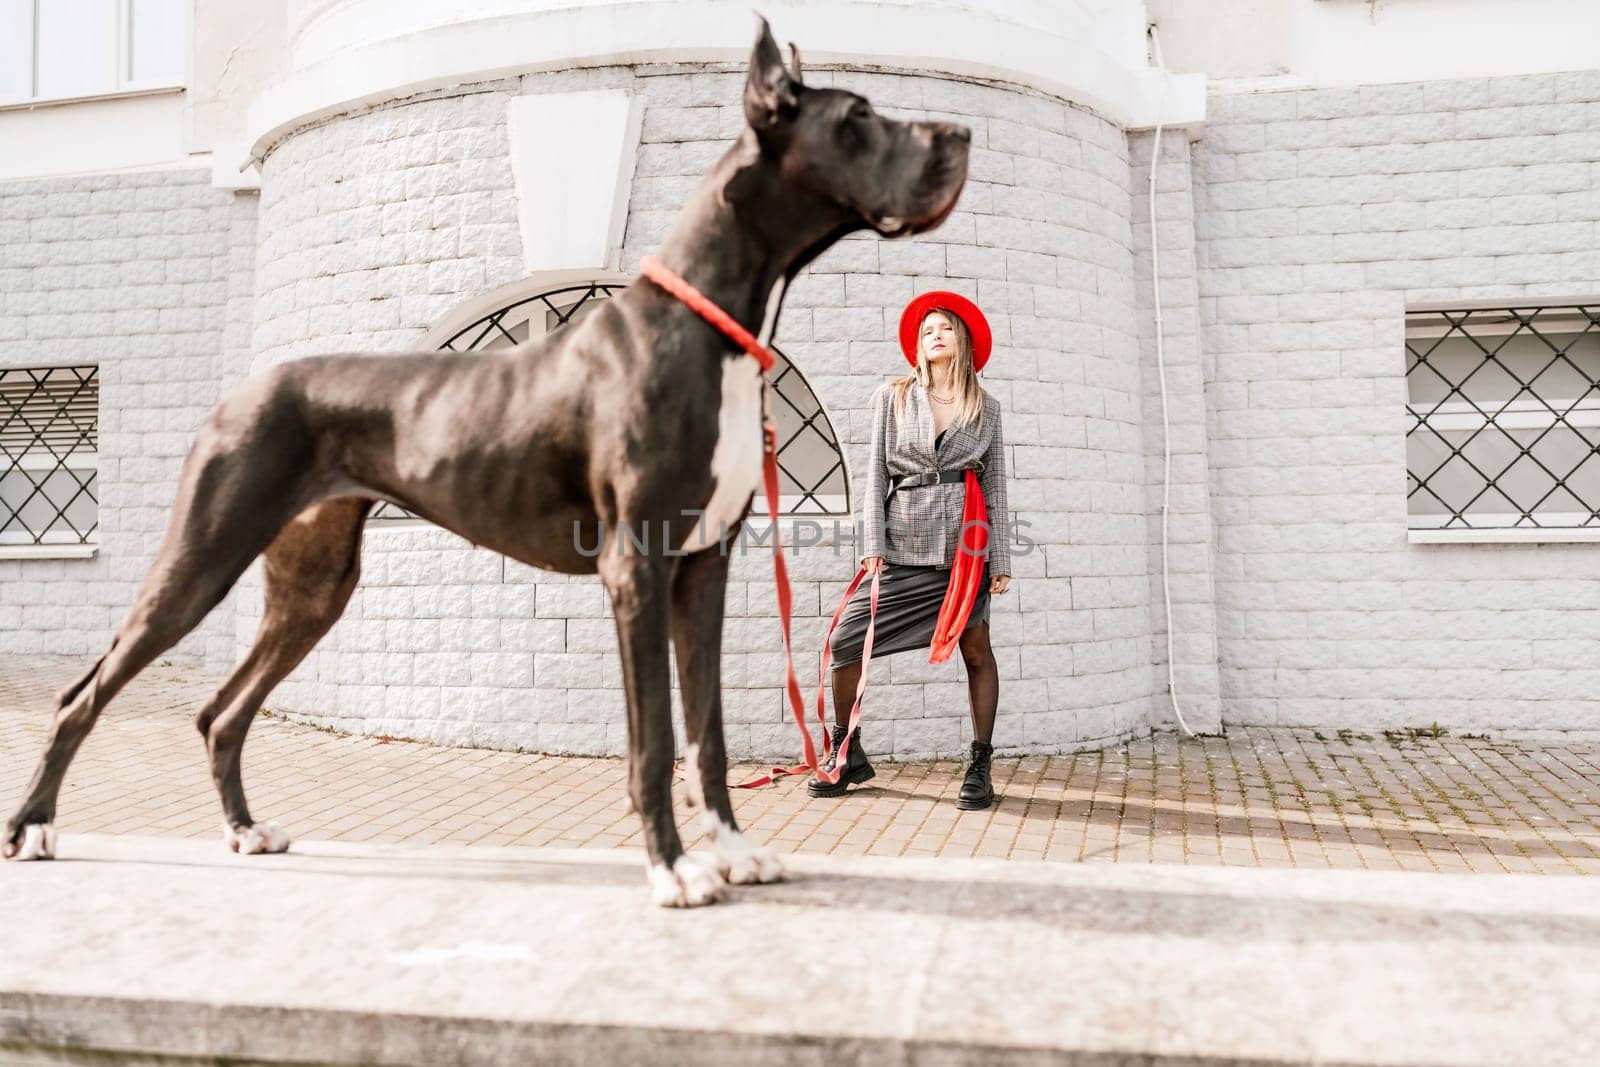 A photo of a woman and her Great Dane walking through a town, taking in the sights and sounds of the urban environment.